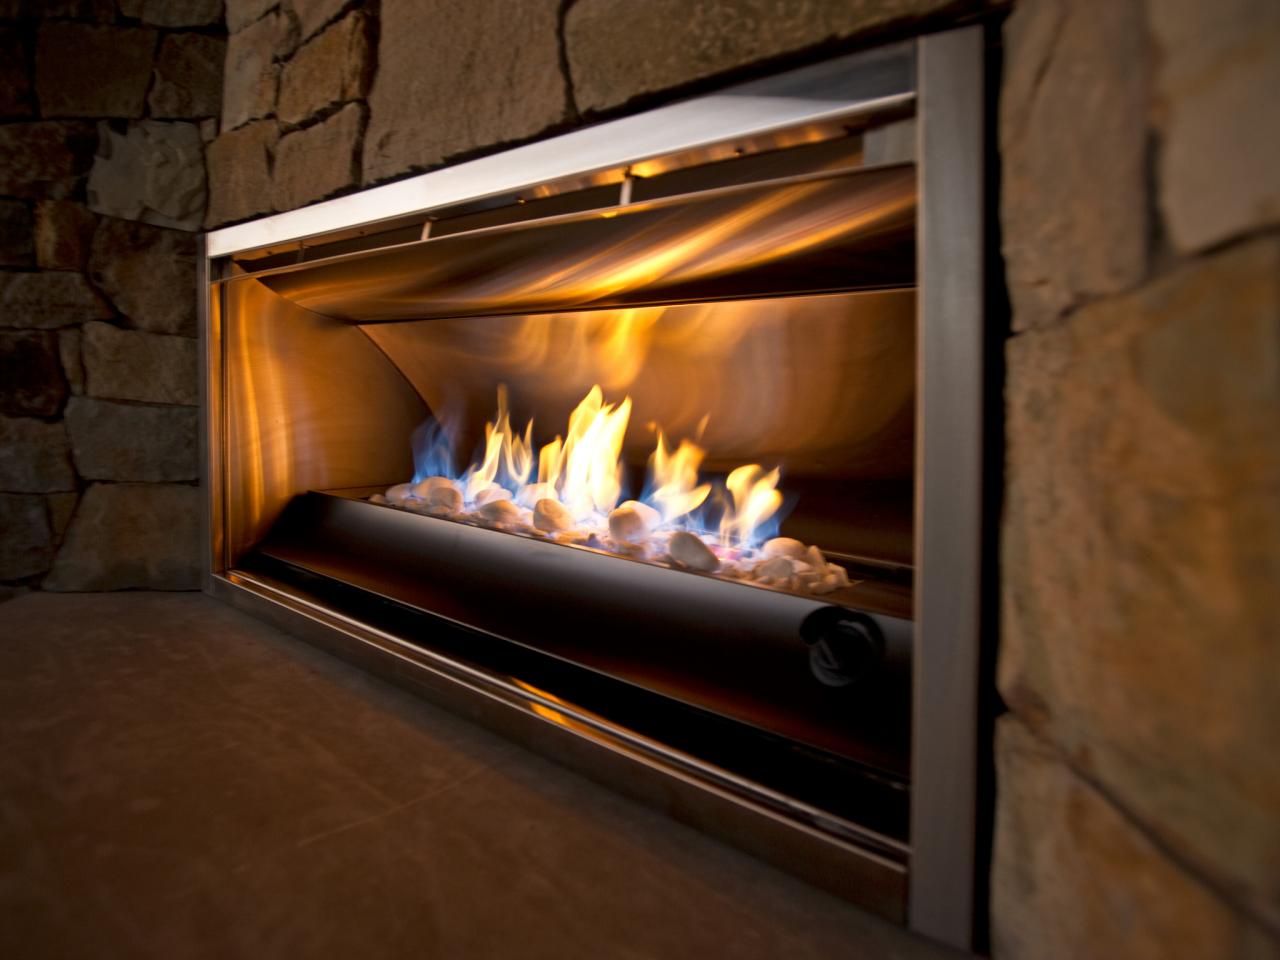 Outdoor Gas Fireplace Options And Ideas, How To Fix Outdoor Gas Fireplace